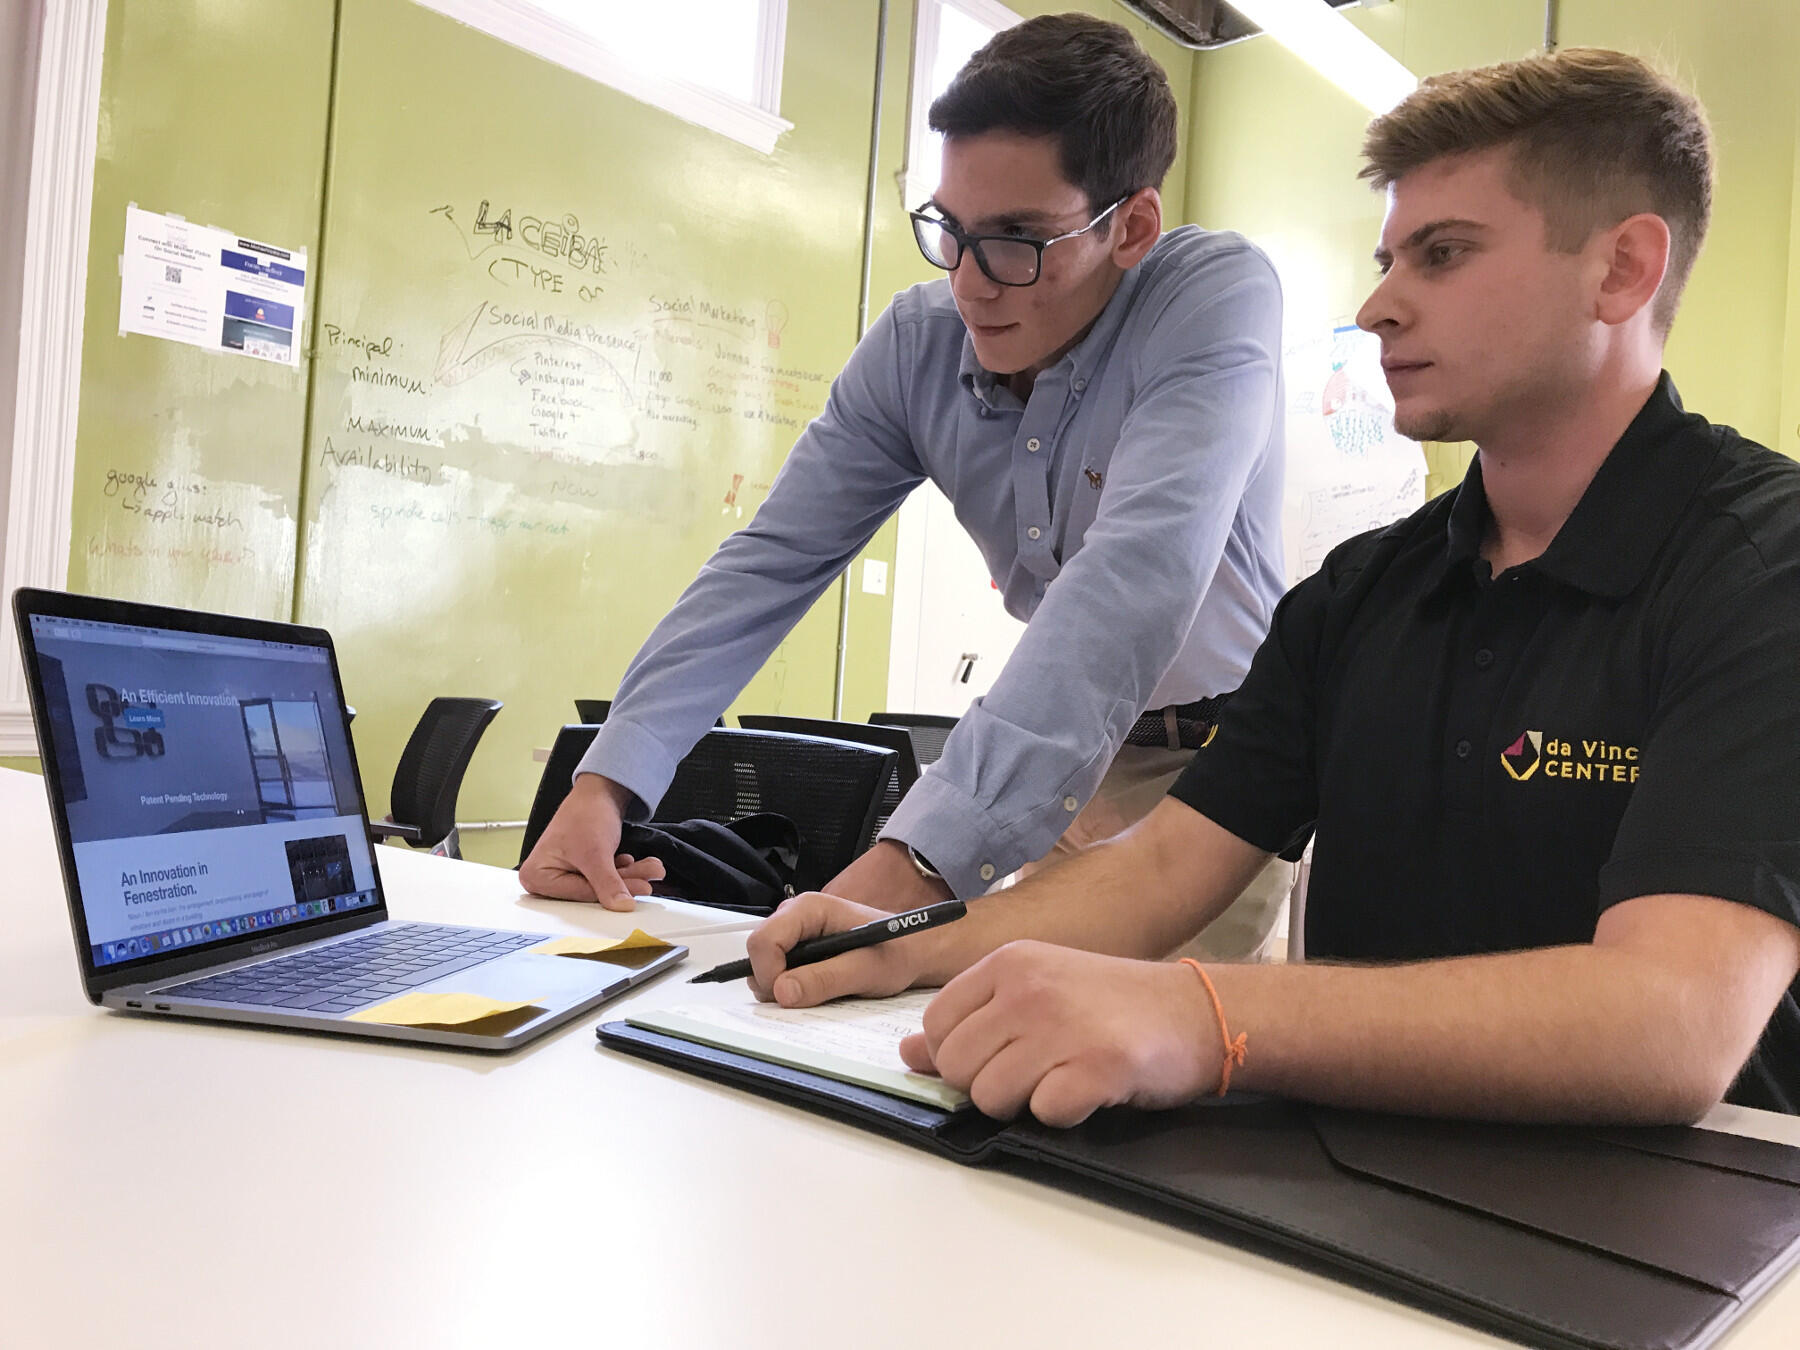 Neil Hailey, a junior mechanical engineering major, and Matthew Sozio, a first-year Master of Product Innovation student, are part of the team Efficient Innovations that is developing their French Slide invention and working to bring it to market.